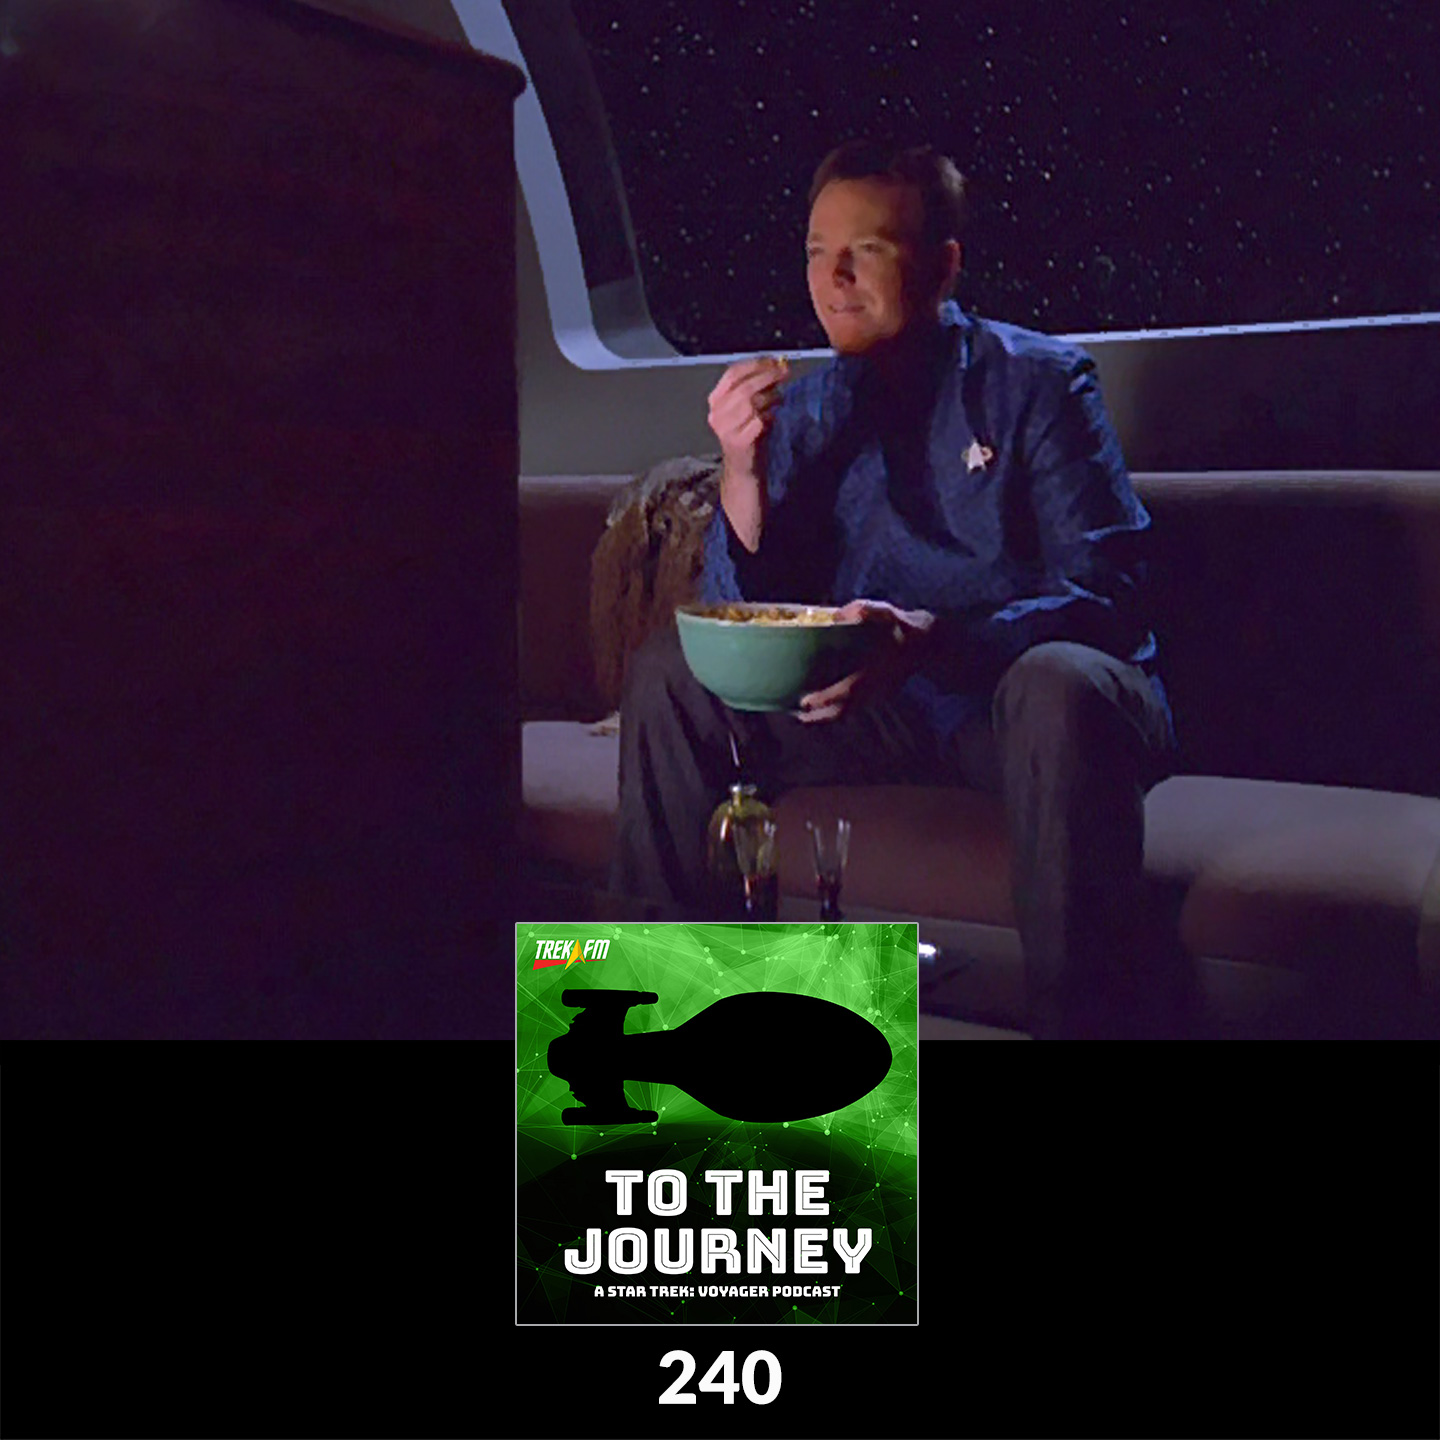 To The Journey 240: Green Shag Carpet - What Voyager Means to Us.